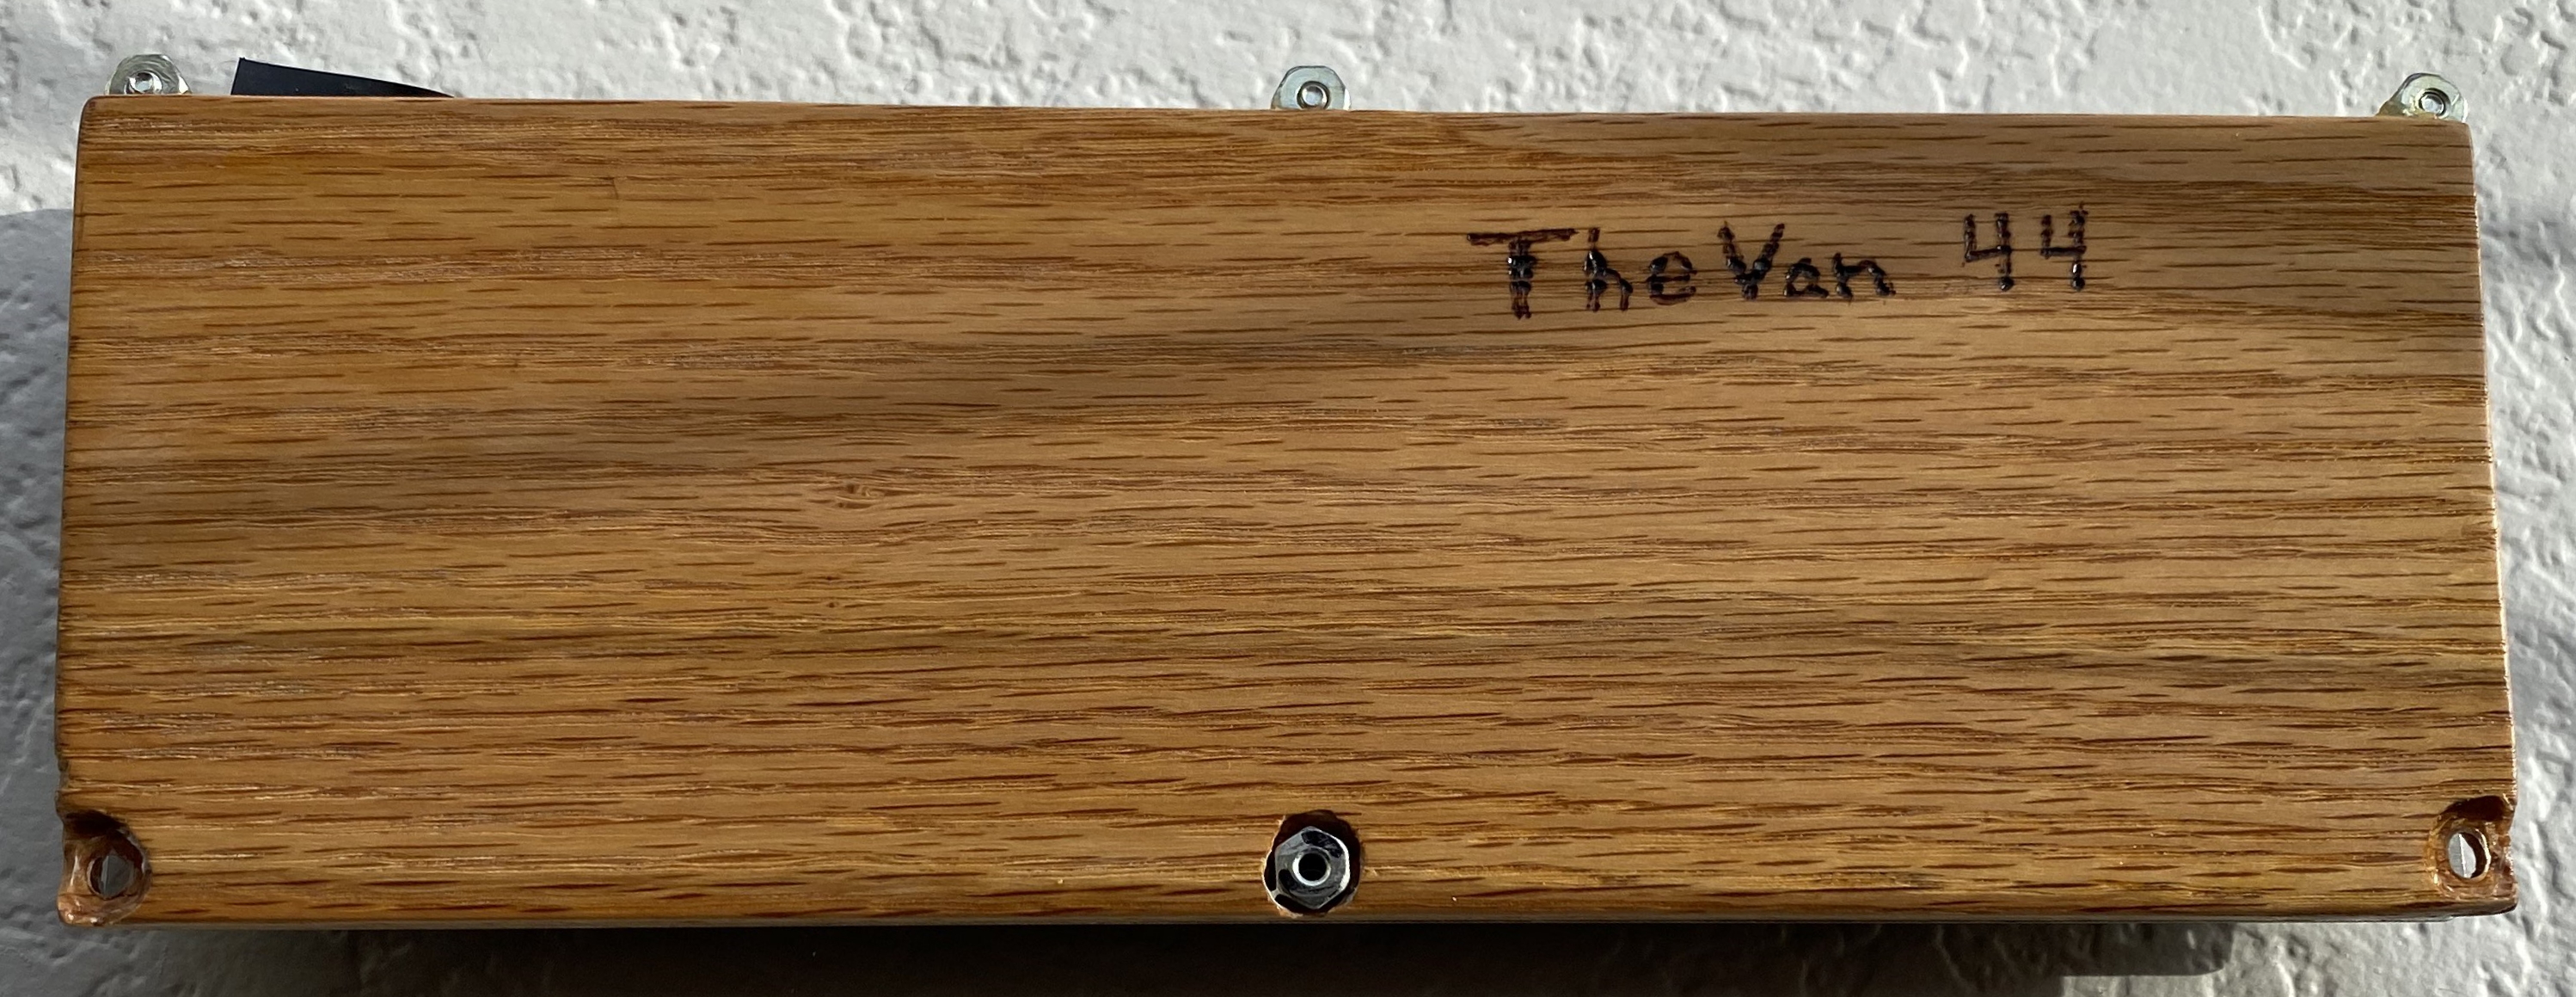 The back of the prototype case with the original name of the board burned in with a soldering iron